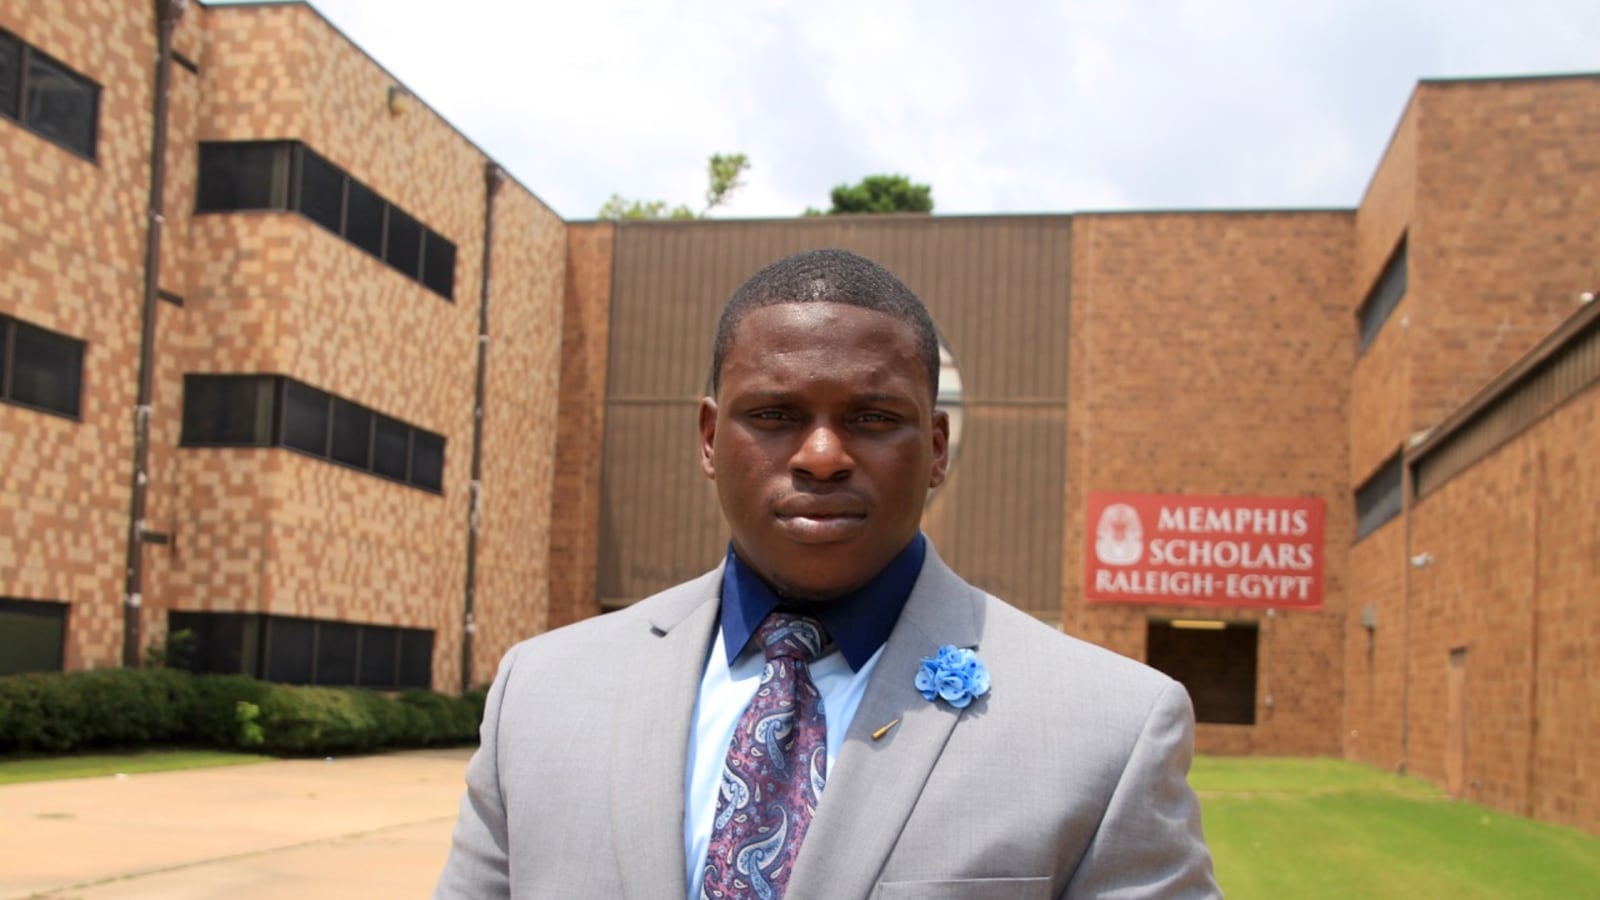 Derek King served as director of culture at Memphis Scholars Raleigh Egypt Middle School, which is relocating across town. He's among the faculty who won't make the move.